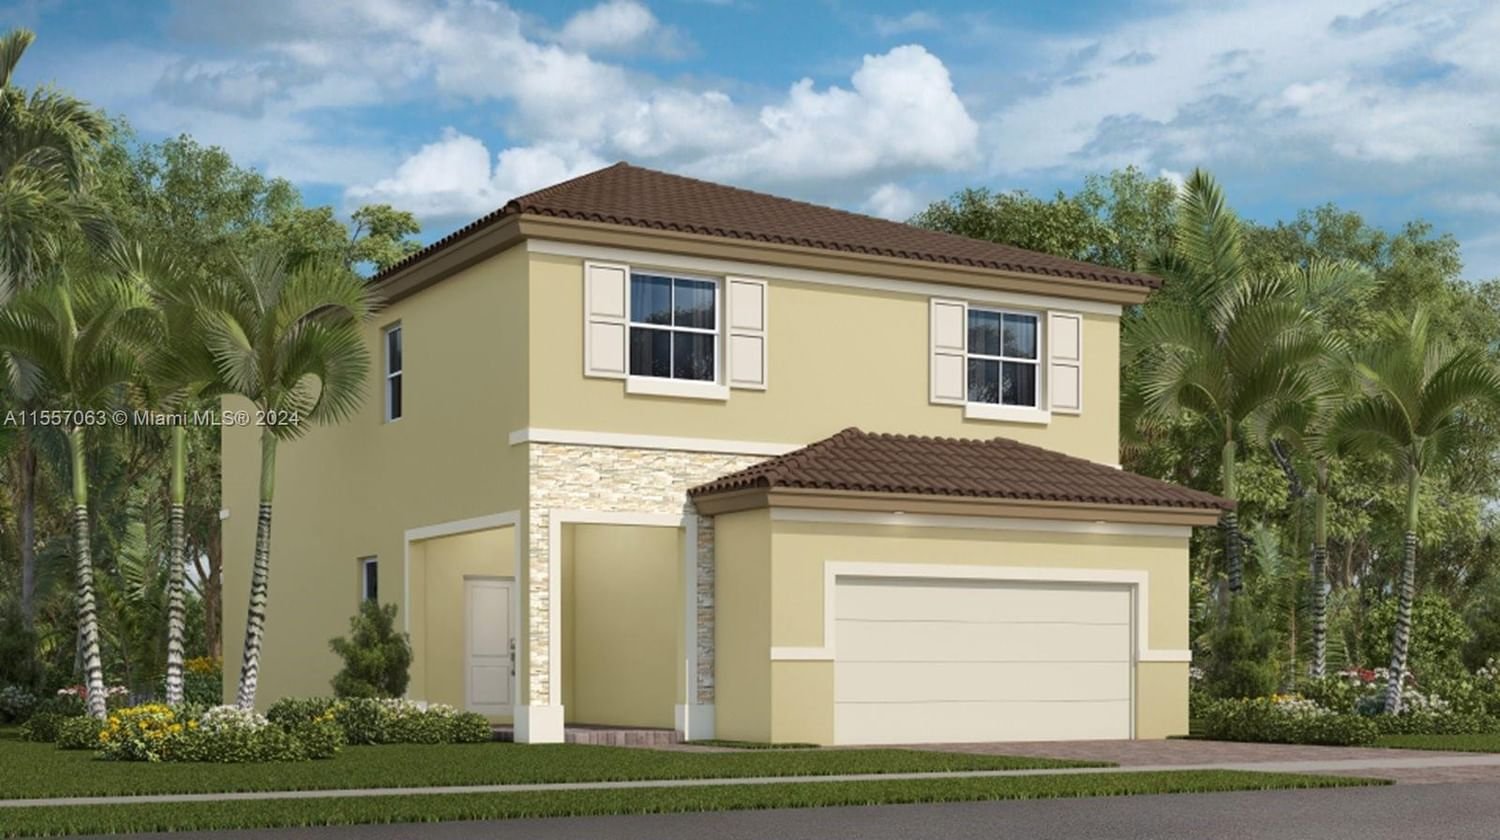 Real estate property located at 2424 24 Ave, Miami-Dade County, Altamira GranadaCollection, Homestead, FL